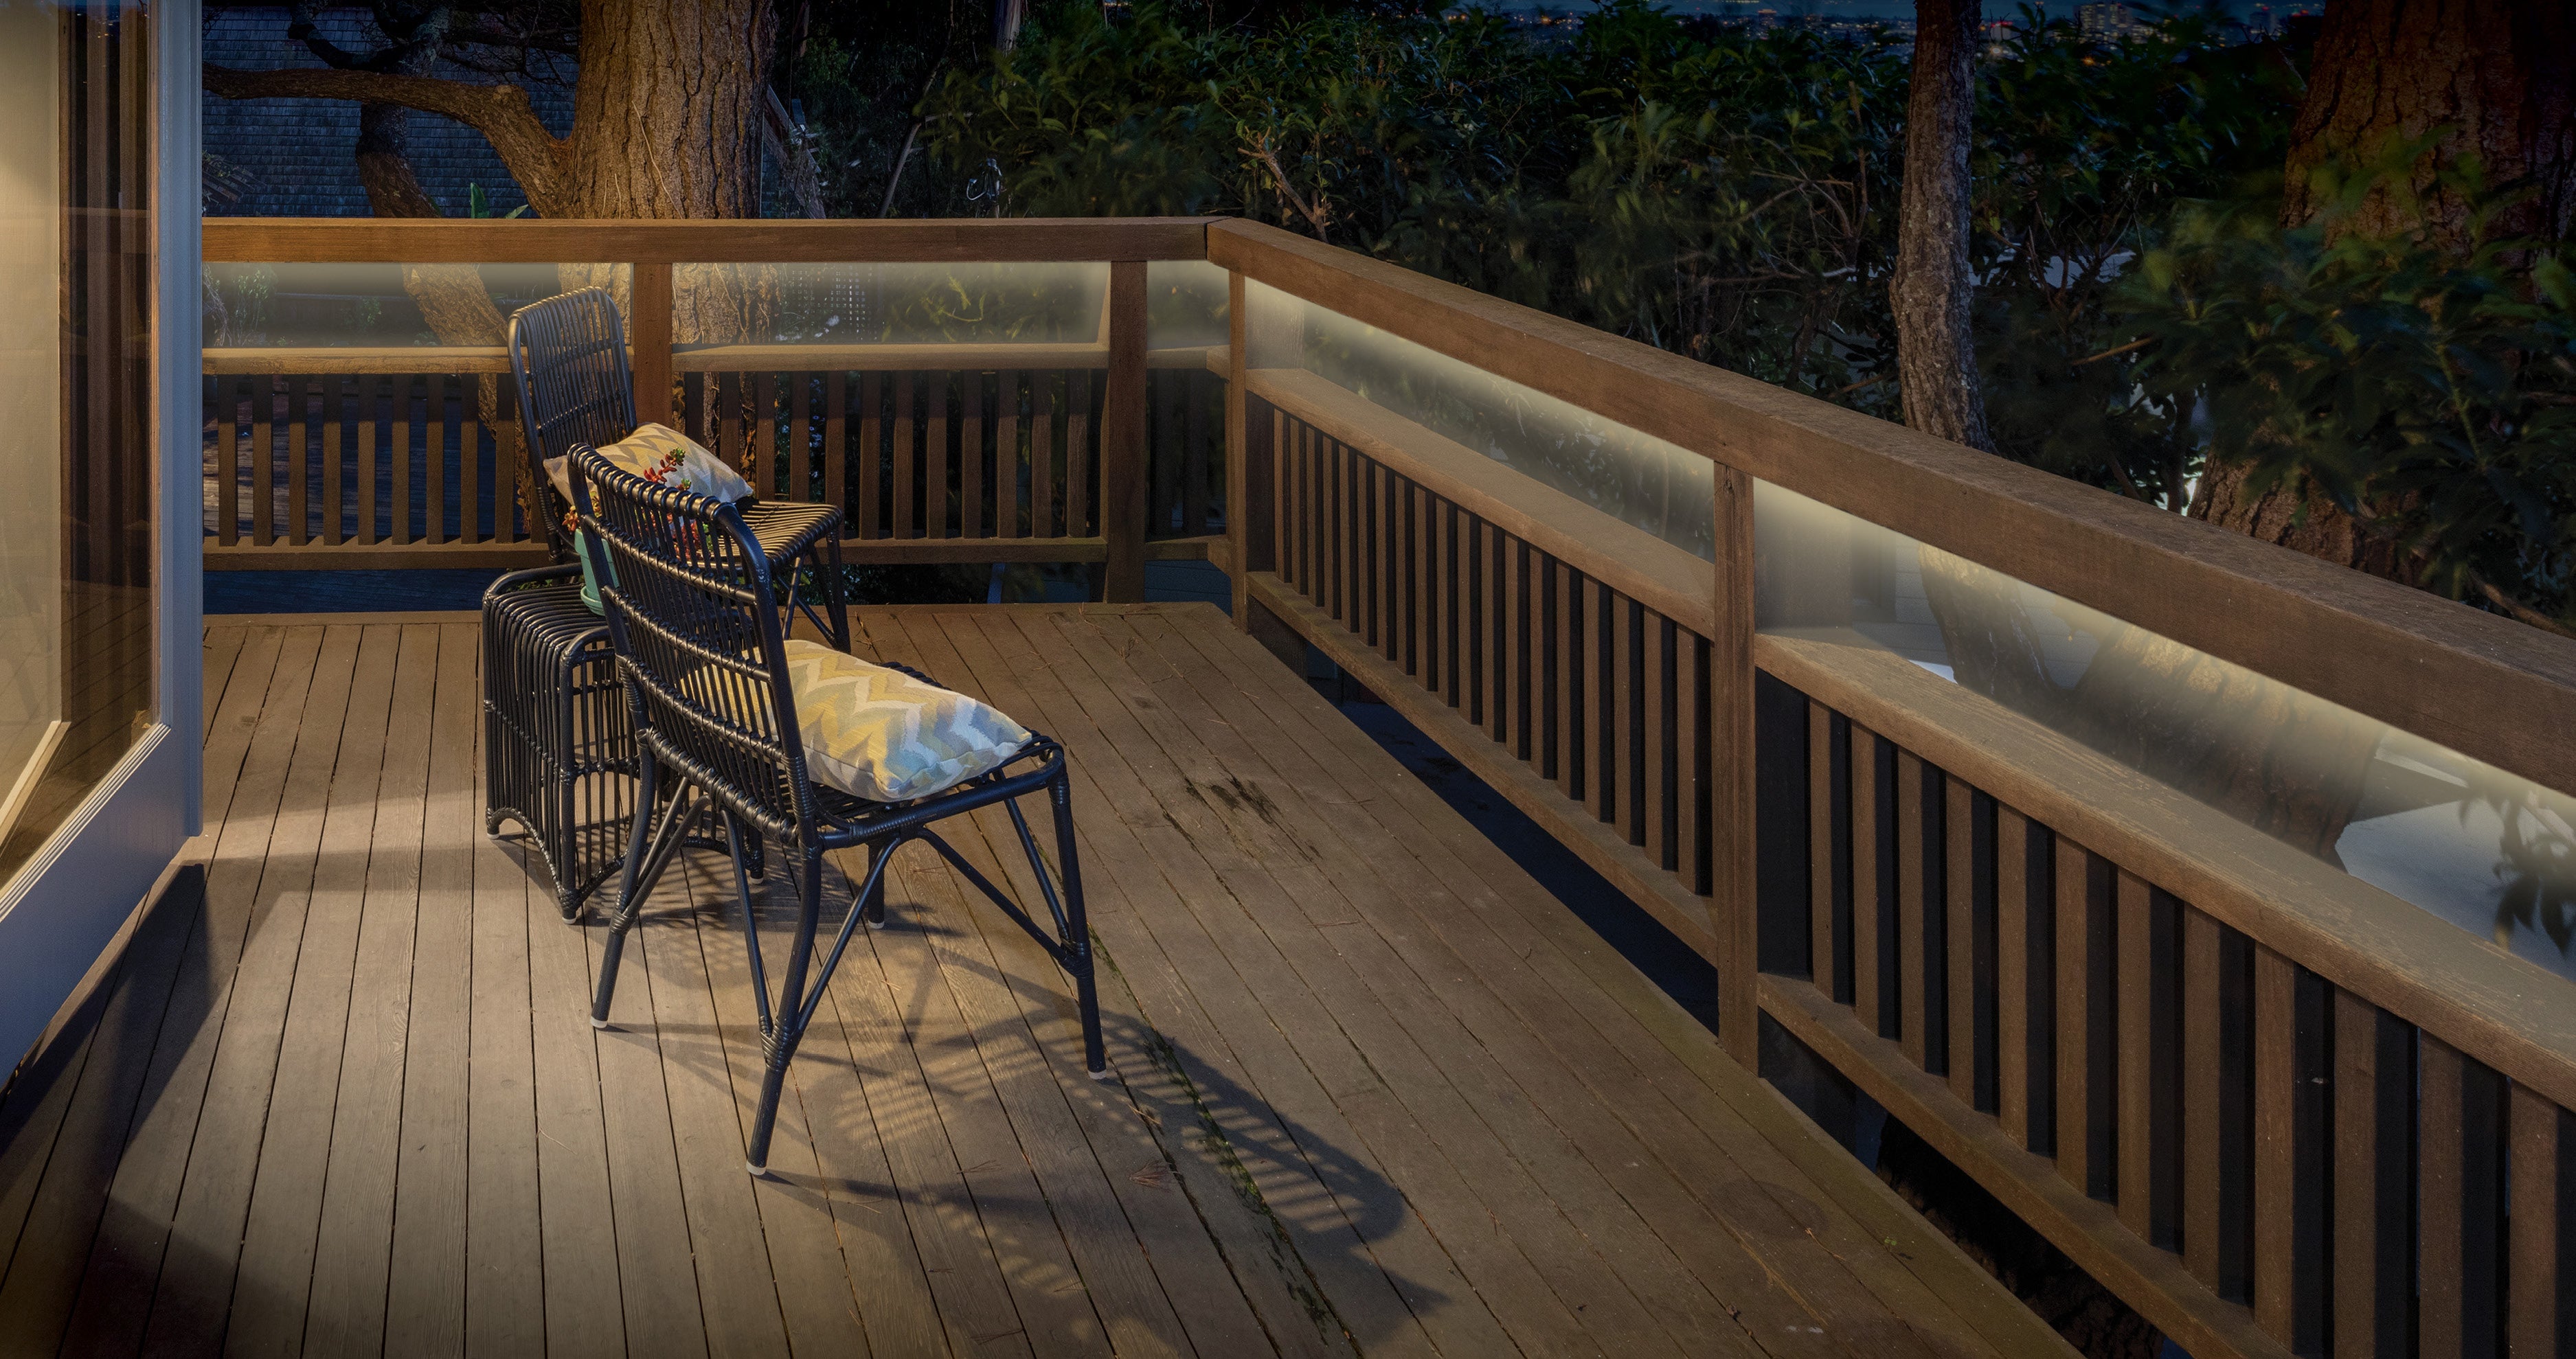 Outdoor LED tape light installed under a deck railing